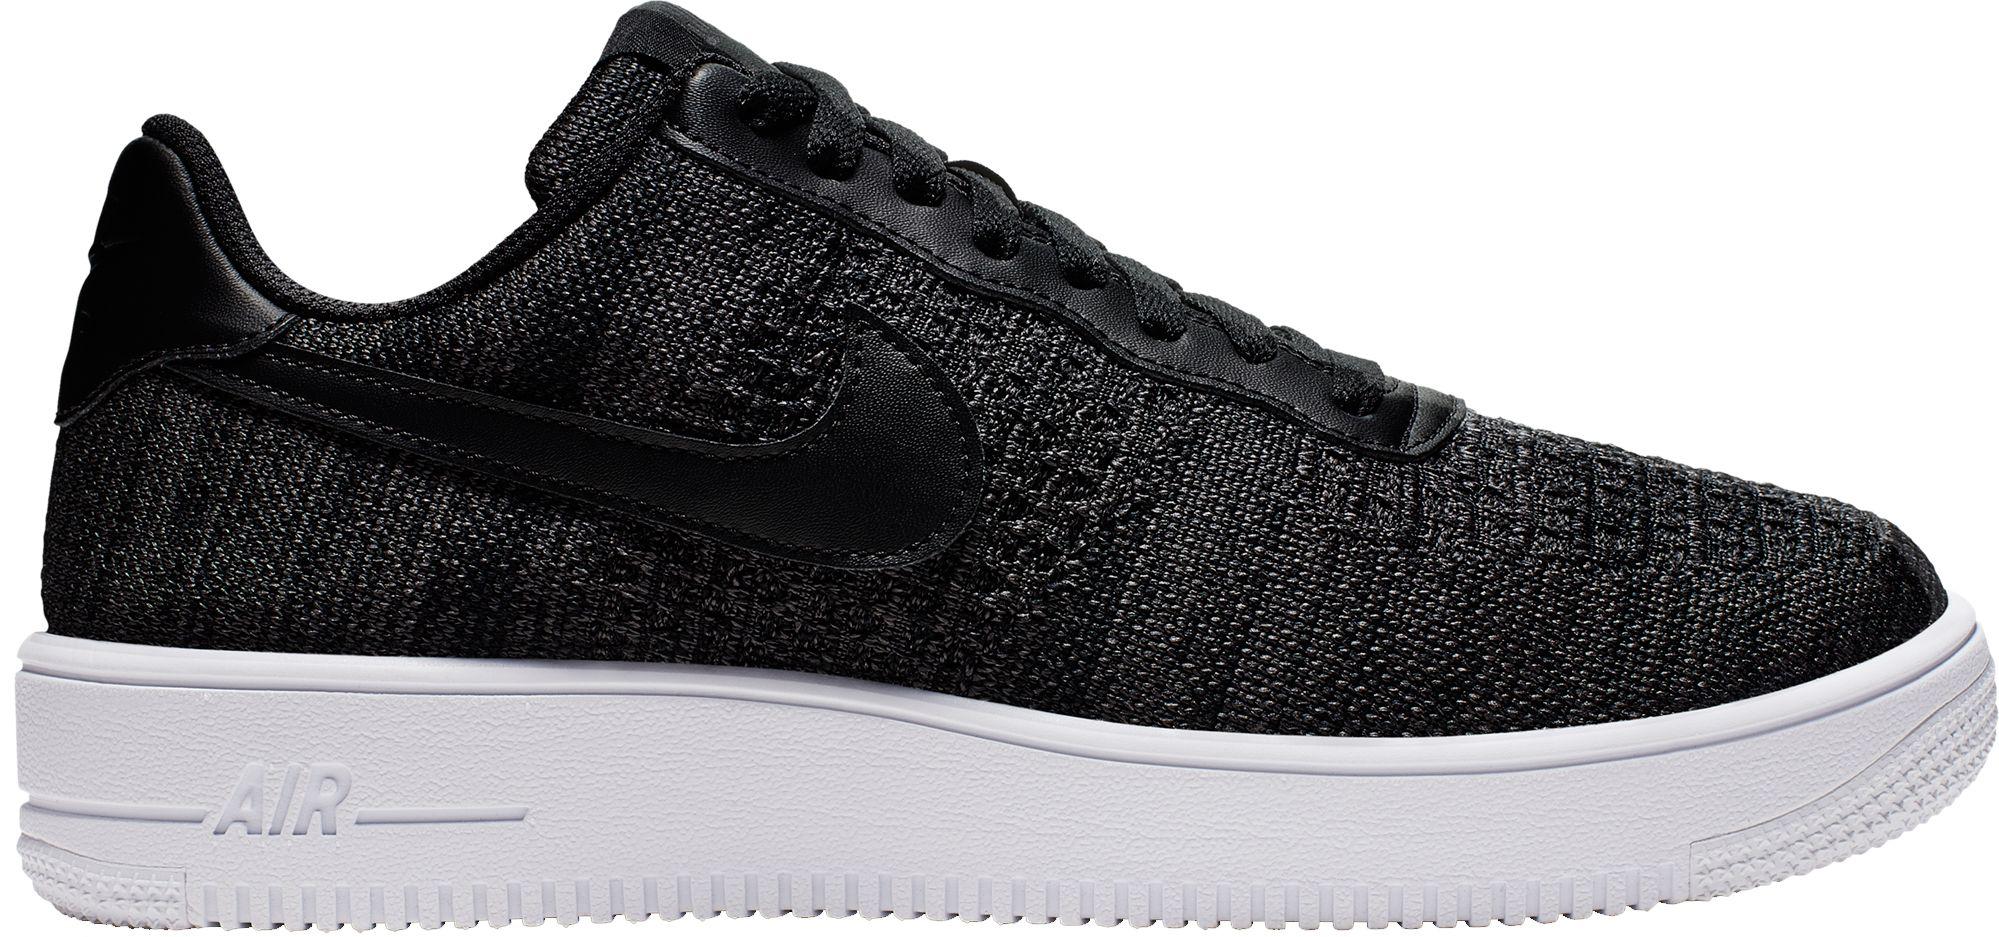 Nike Synthetic Air Force 1 Flyknit 2.0 in Black,White,Anthracite (Black)  for Men - Lyst